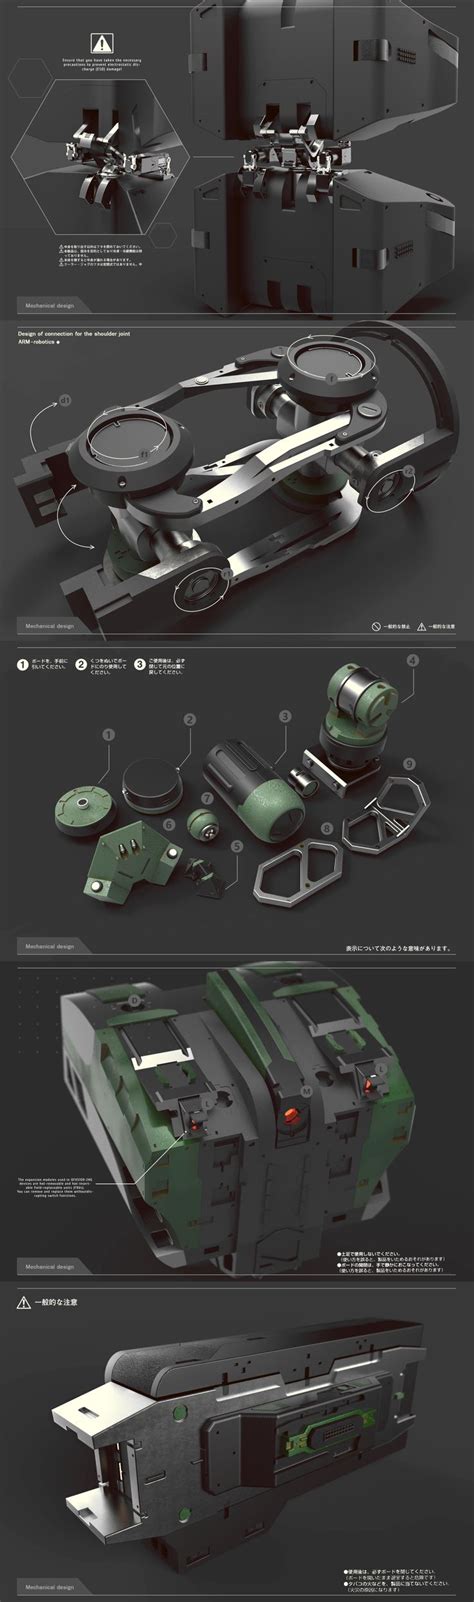 Check Out My Behance Project “mech Detail”